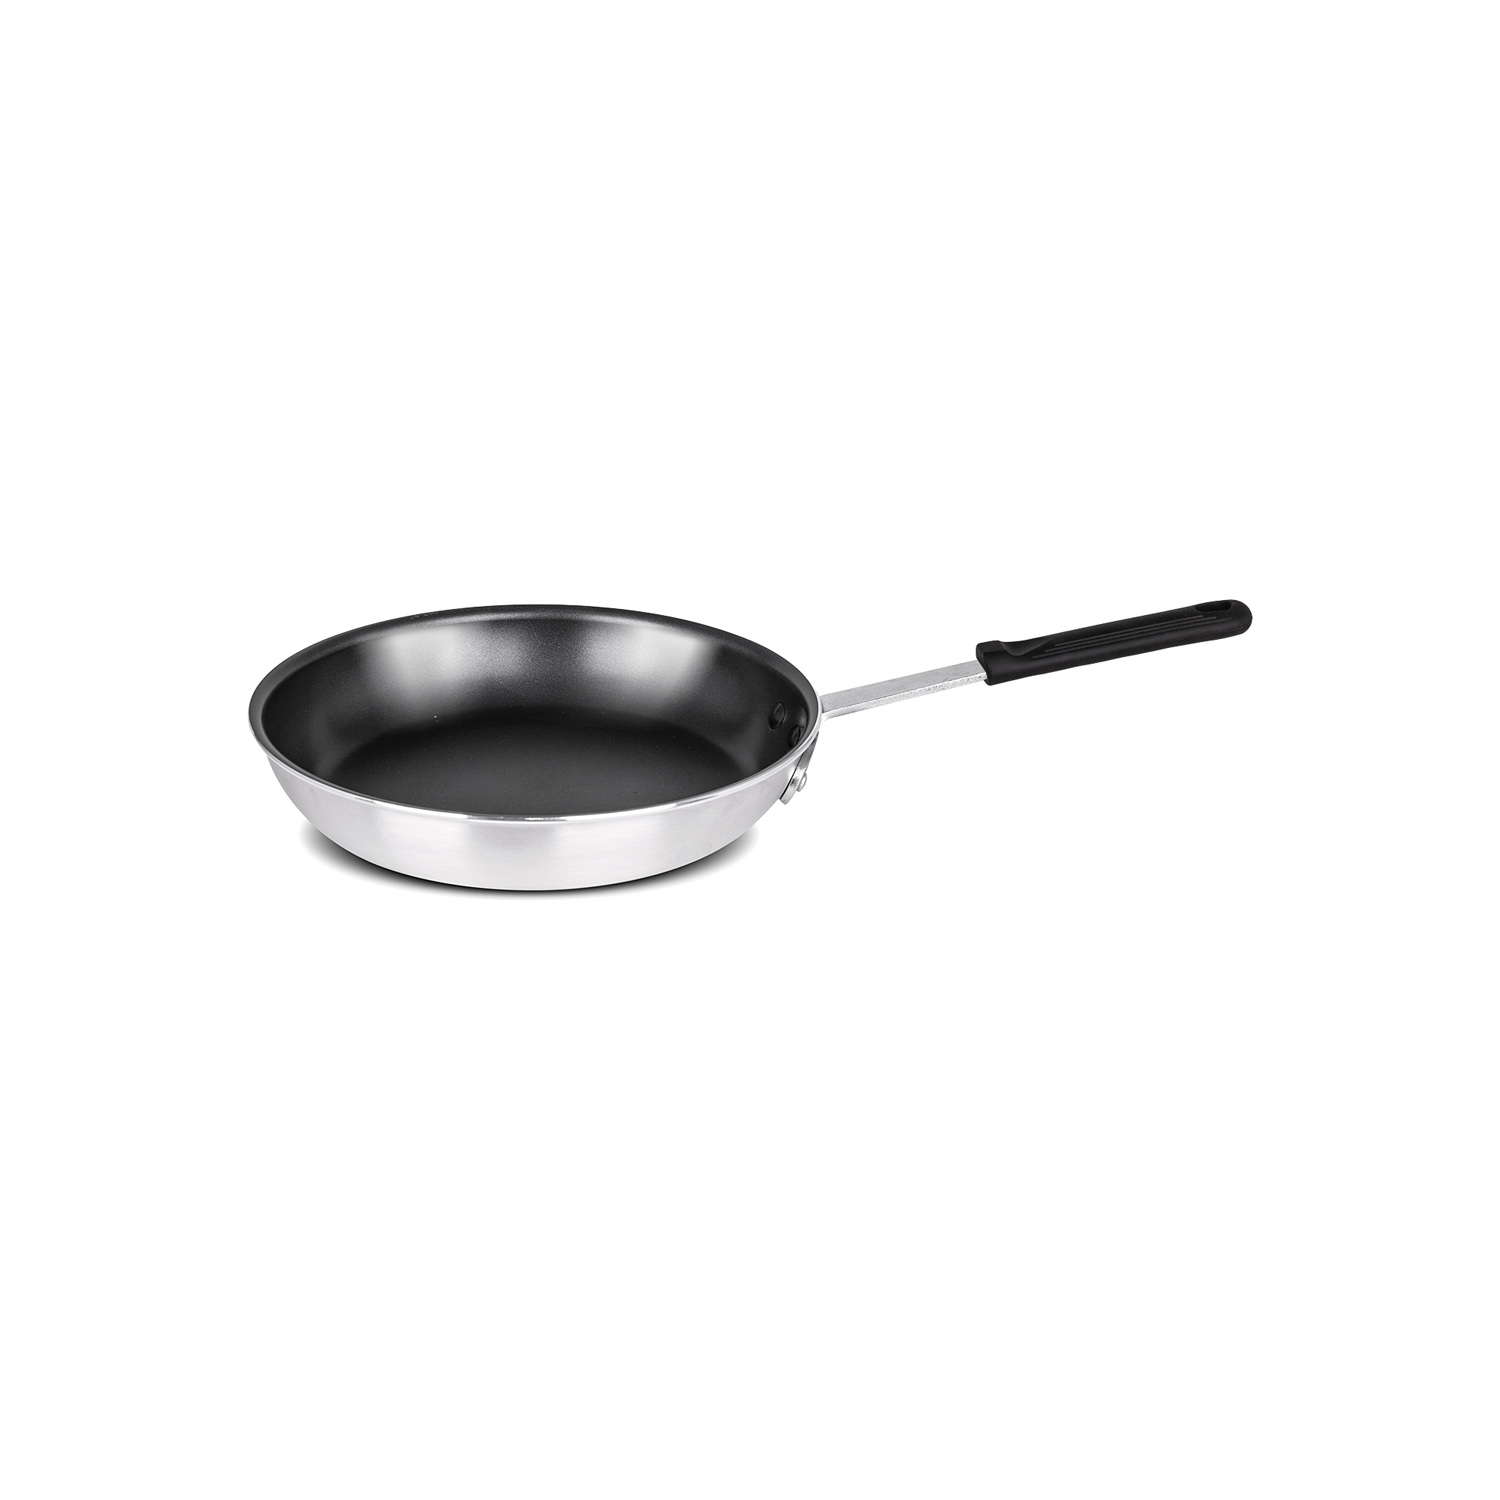 CAC China A4FP-14NL Non-Stick Aluminum Fry Pan with Sleeve 14"